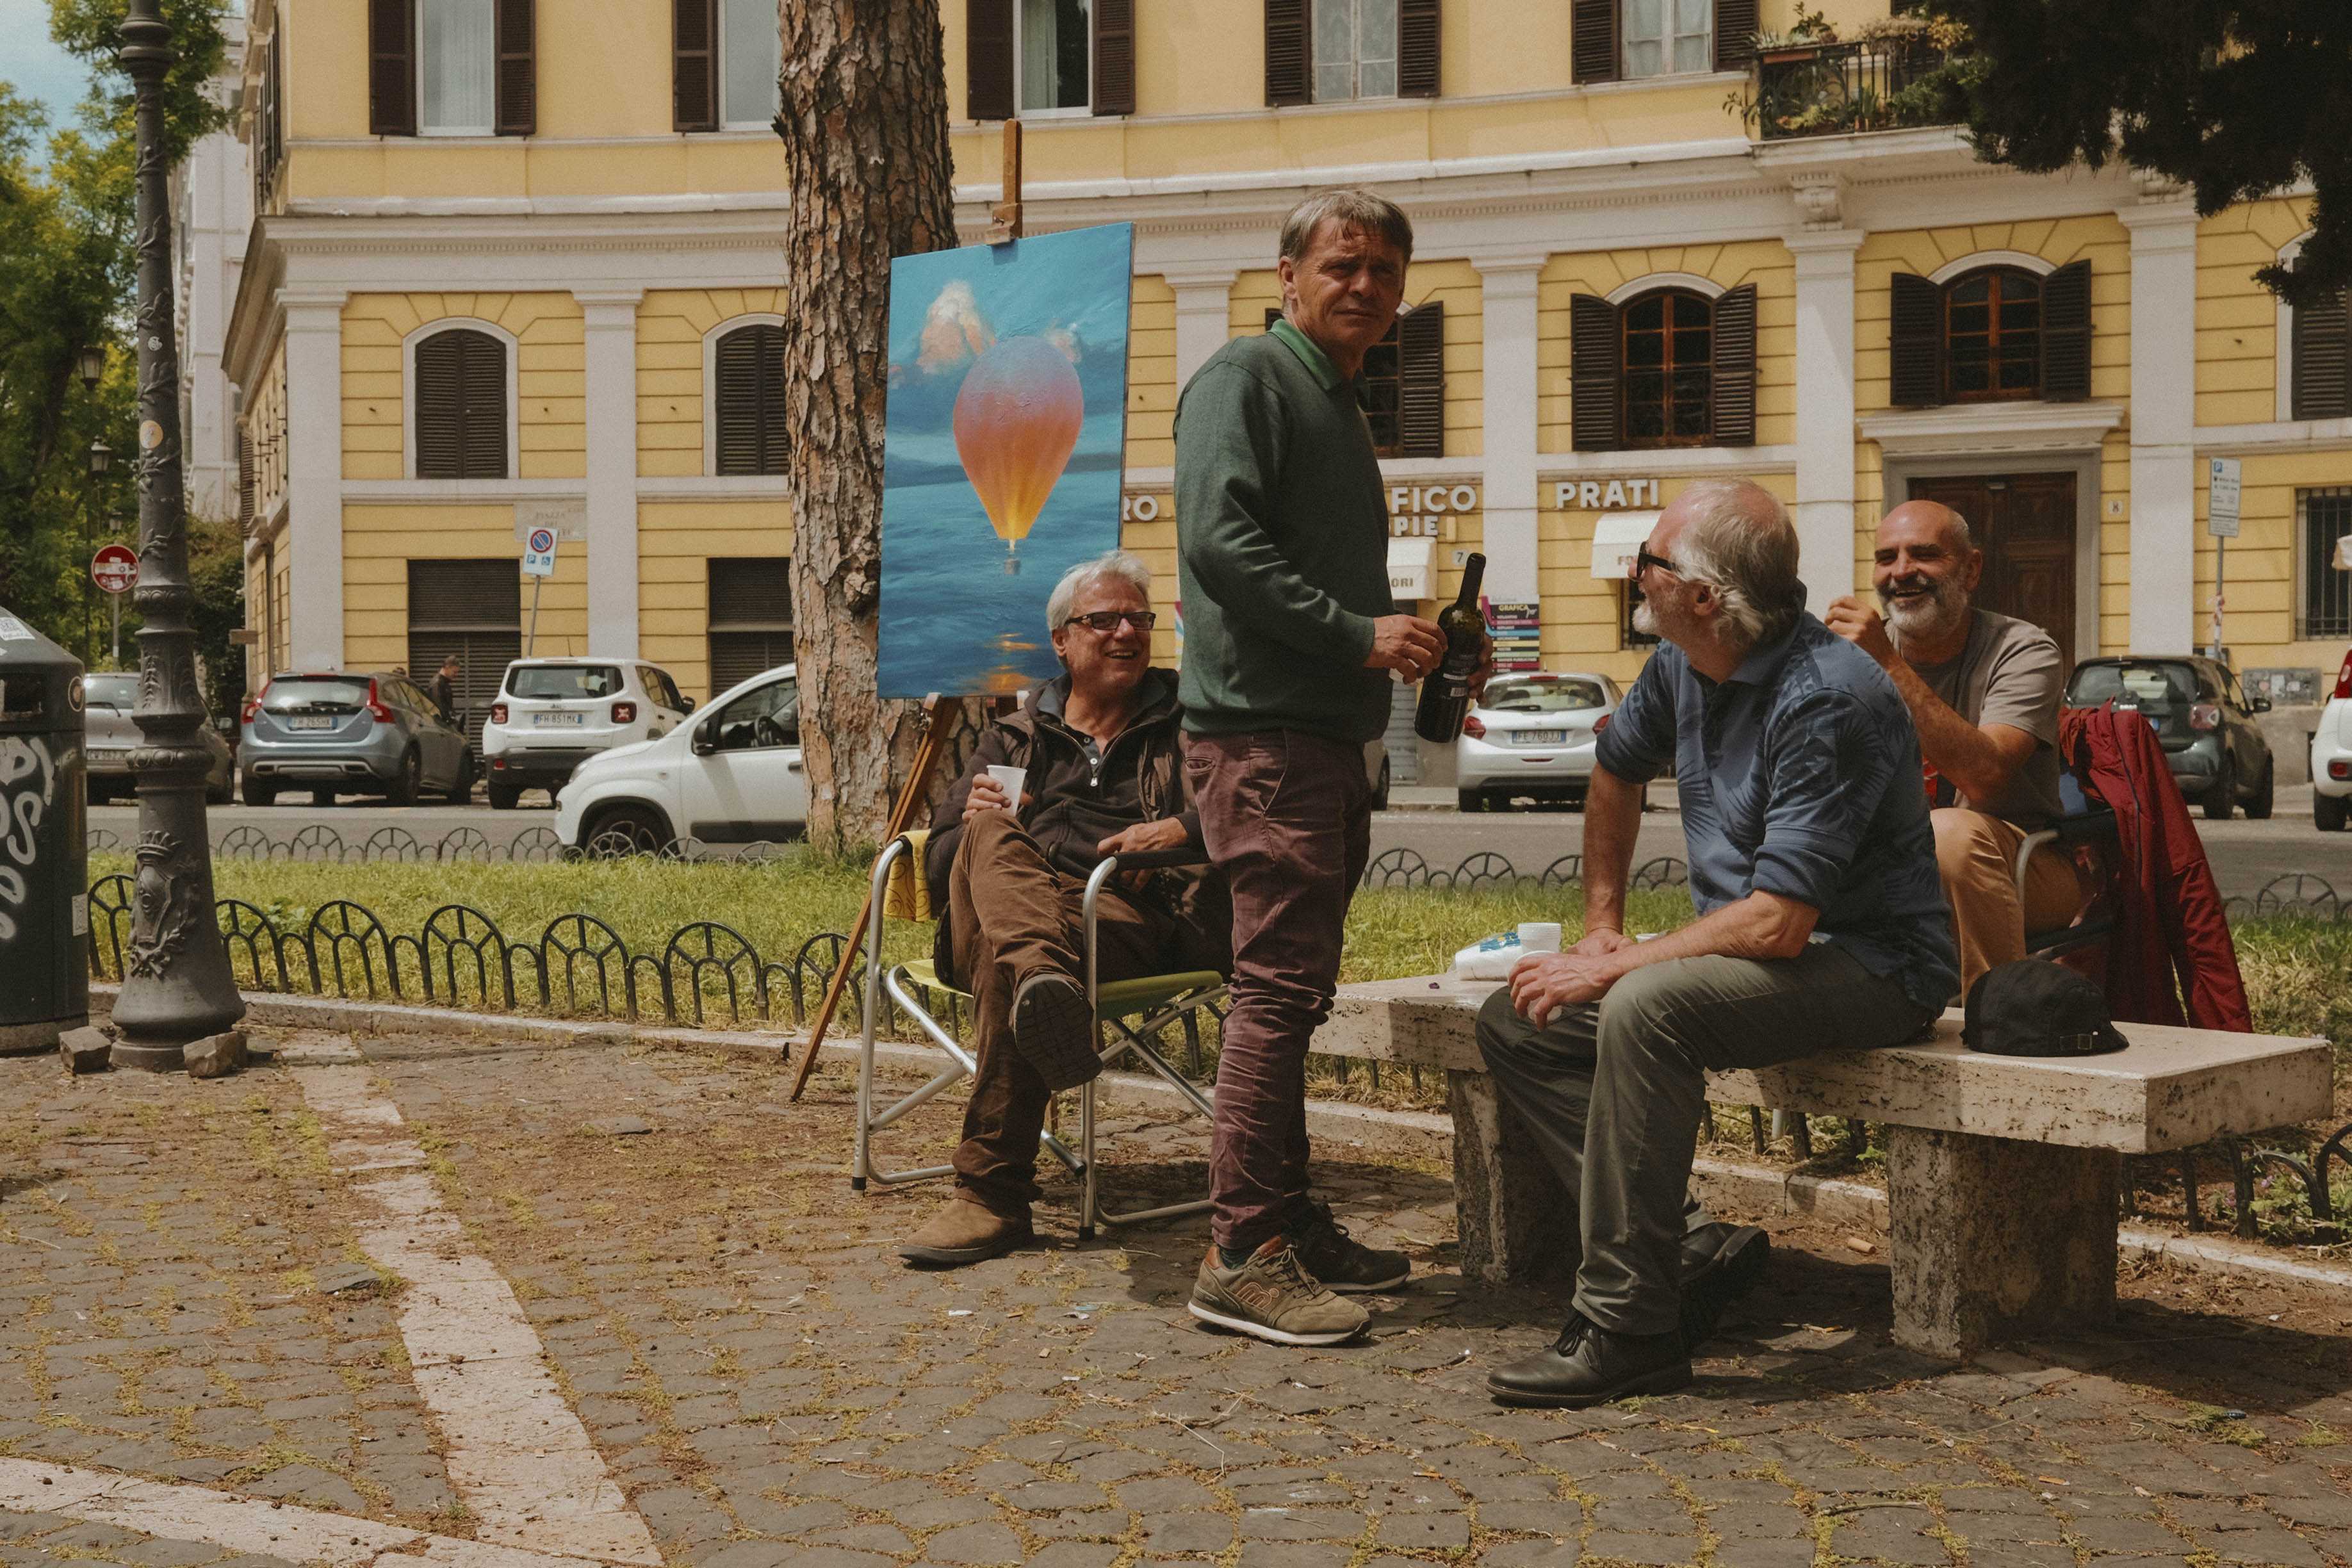 Group of older gentlemen laughing and sharing a bottle of wine at a park bench. One is turned around an seems to have noticed the camera